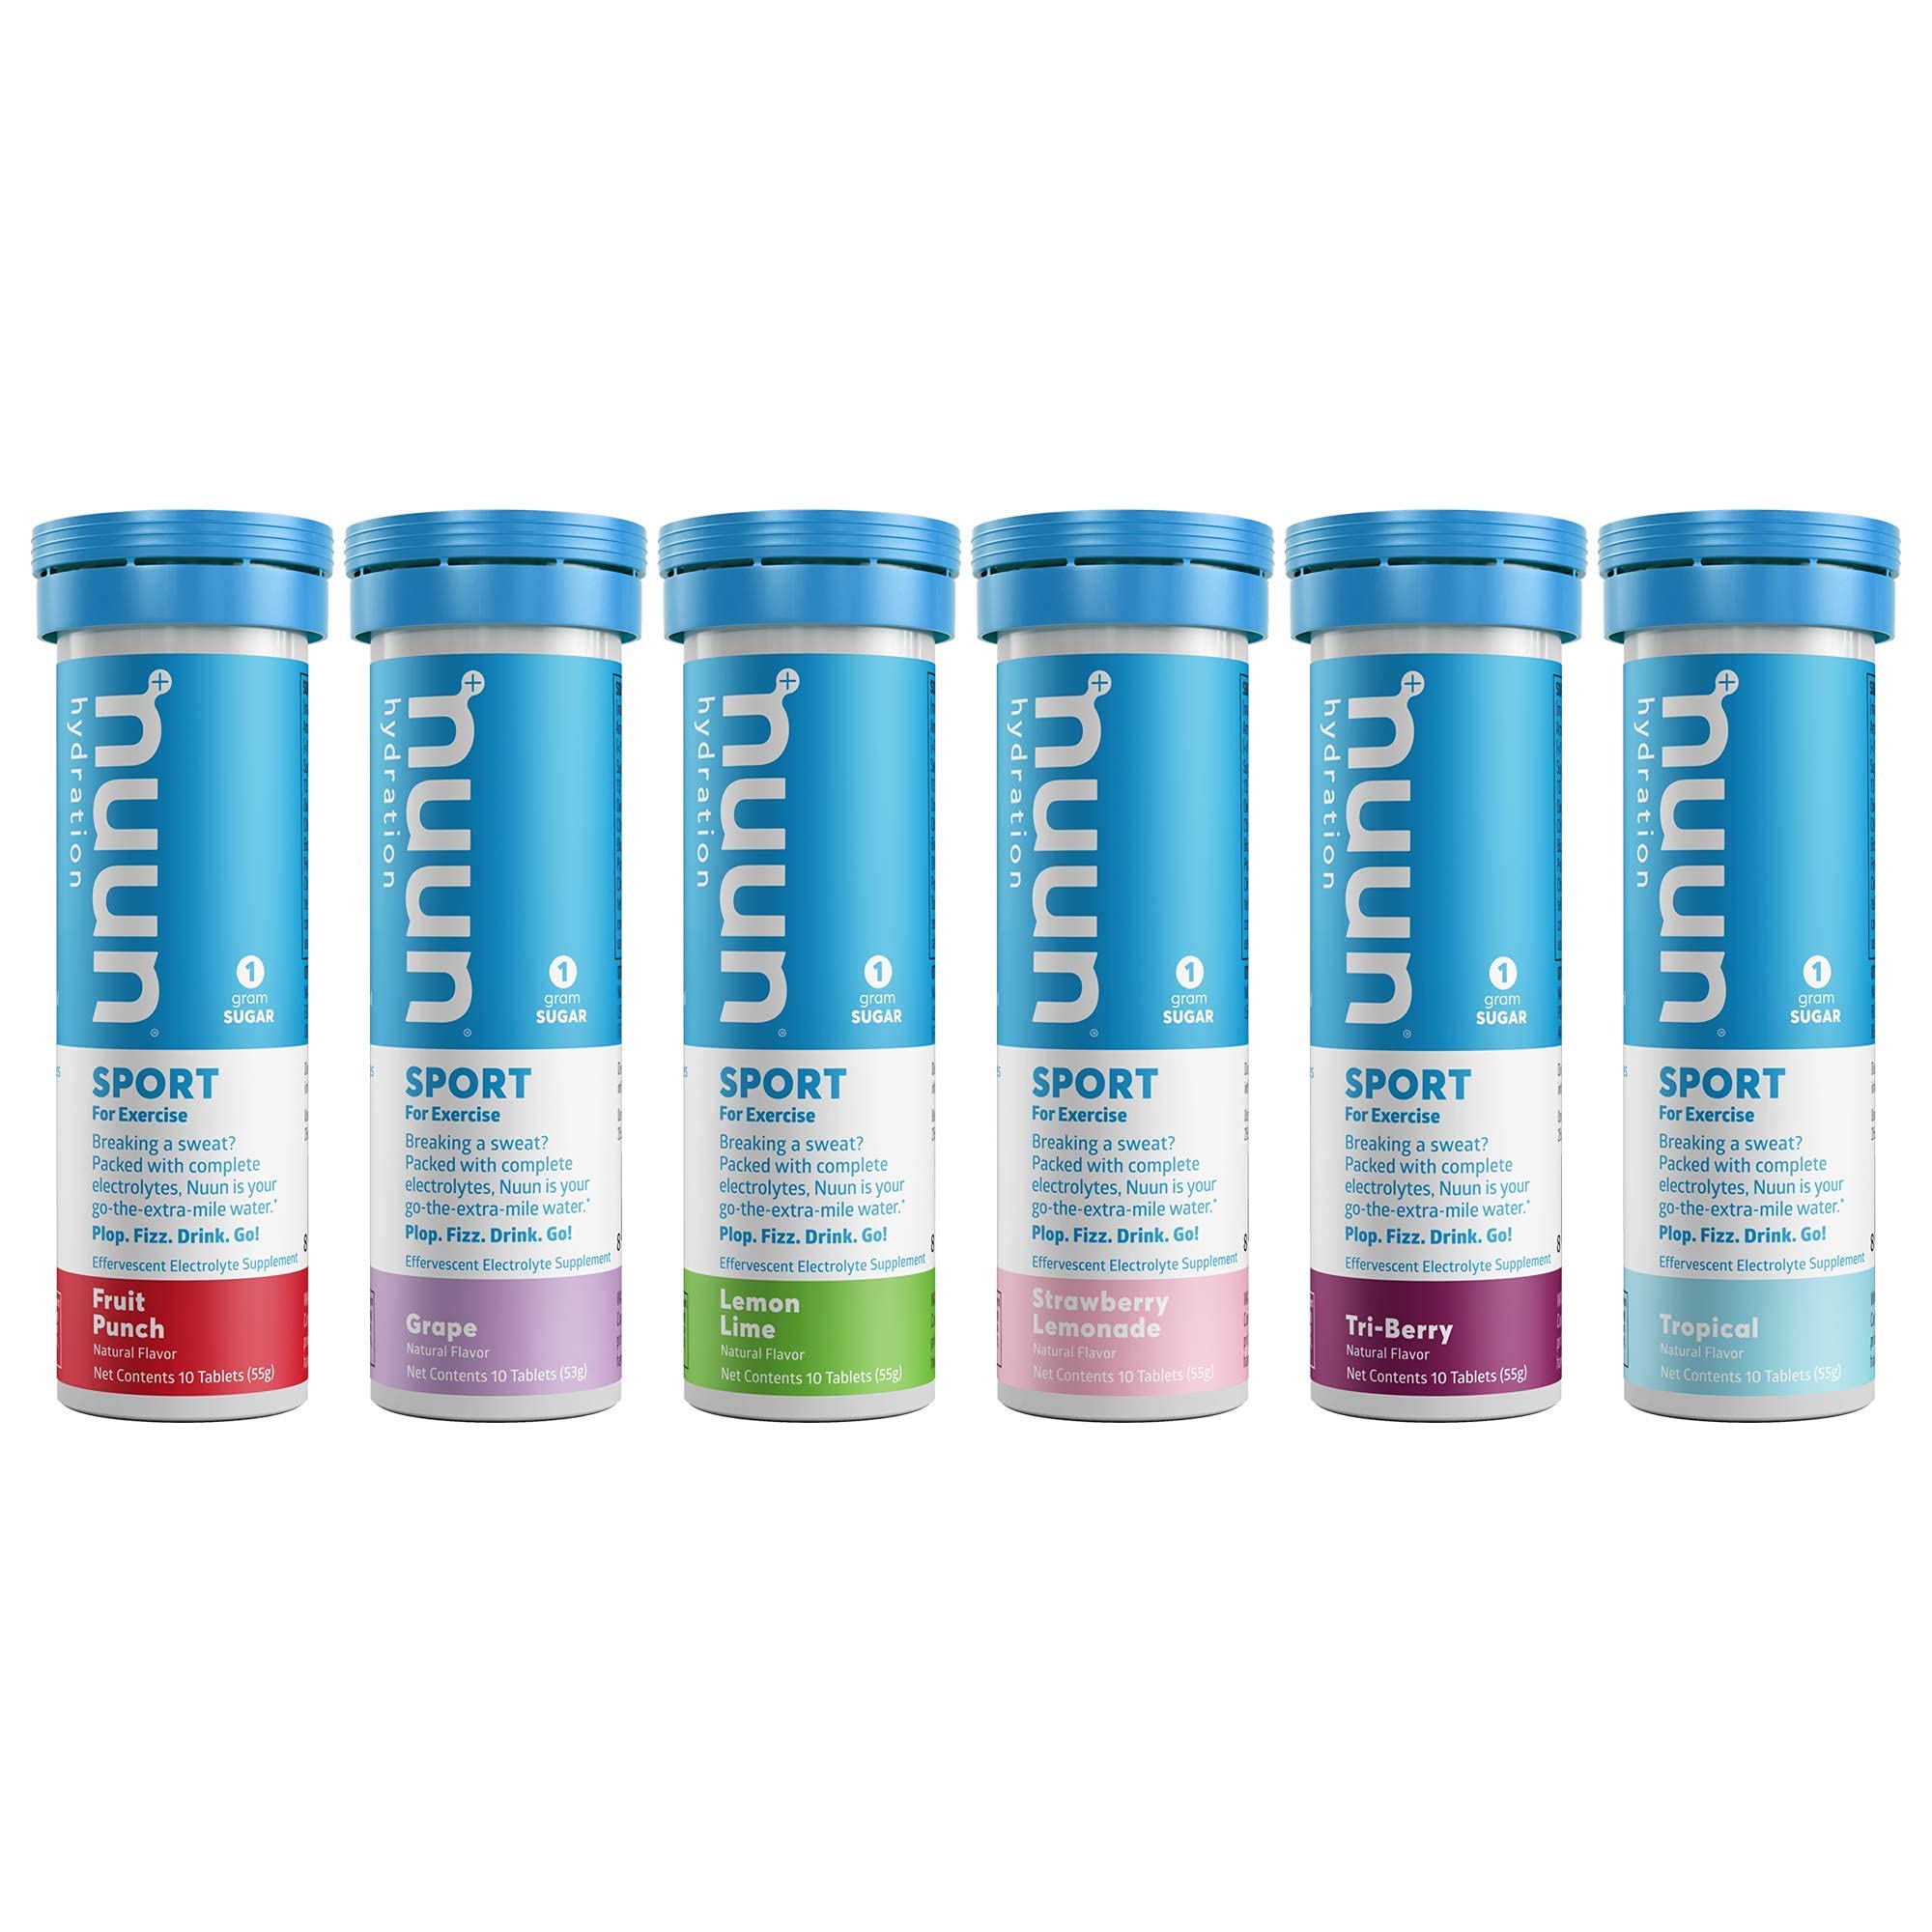 Nuun Sport Electrolyte Tablets for Proactive Hydration, Variety Pack, 6 Pack (60 Servings)